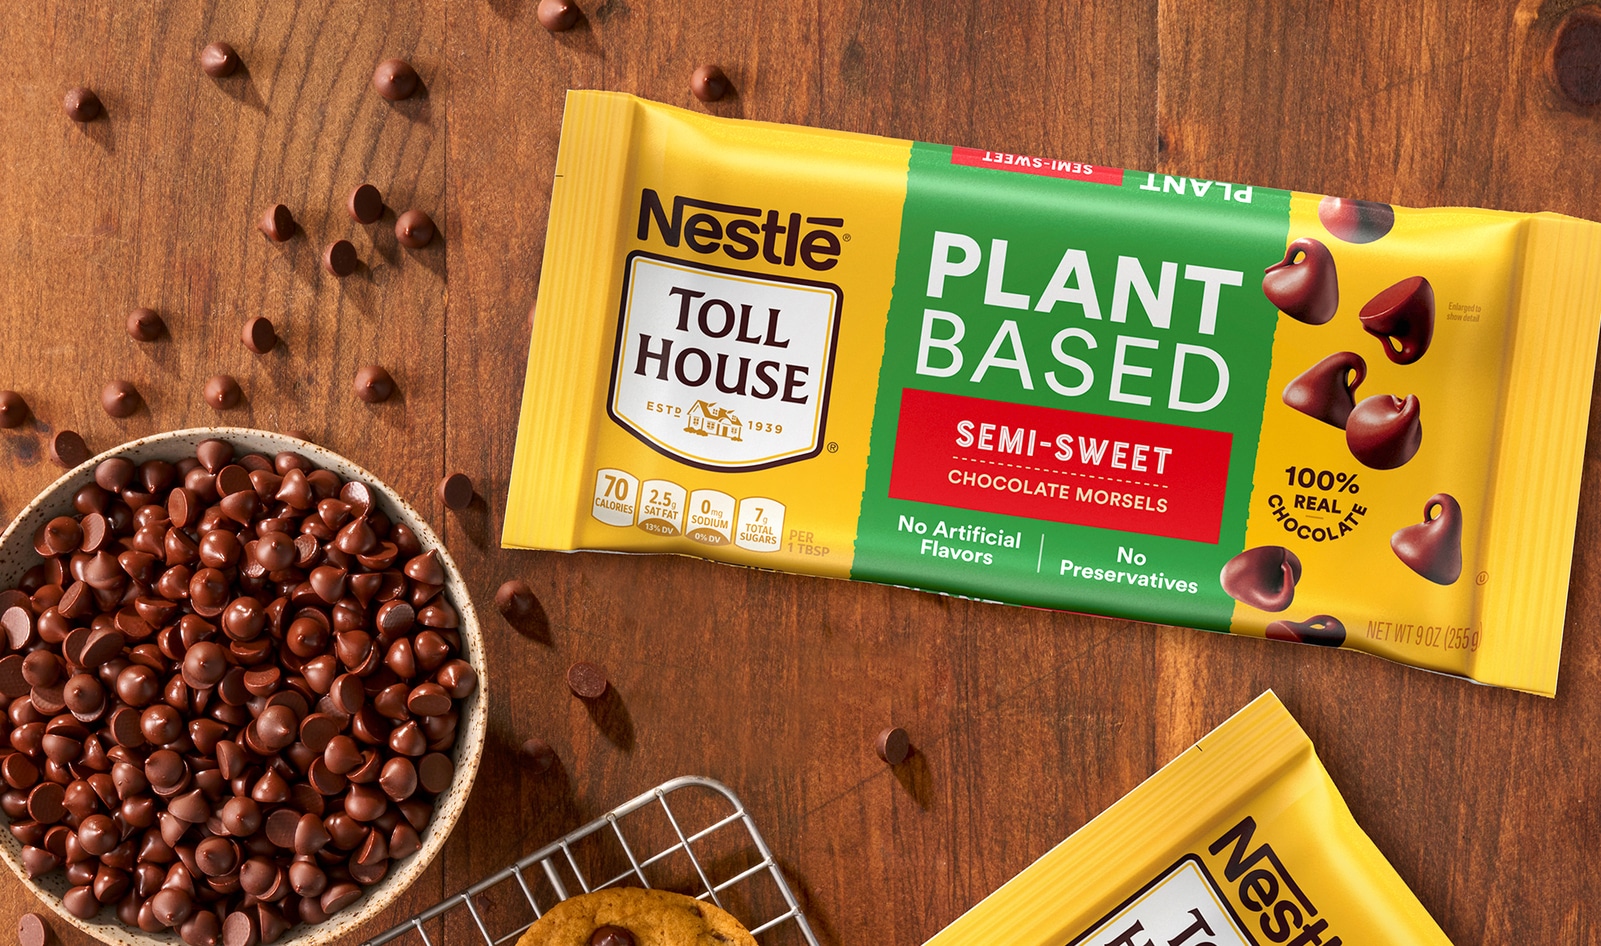 Nestlé's Plant-Based Focus Is Key to Its Status as the World's